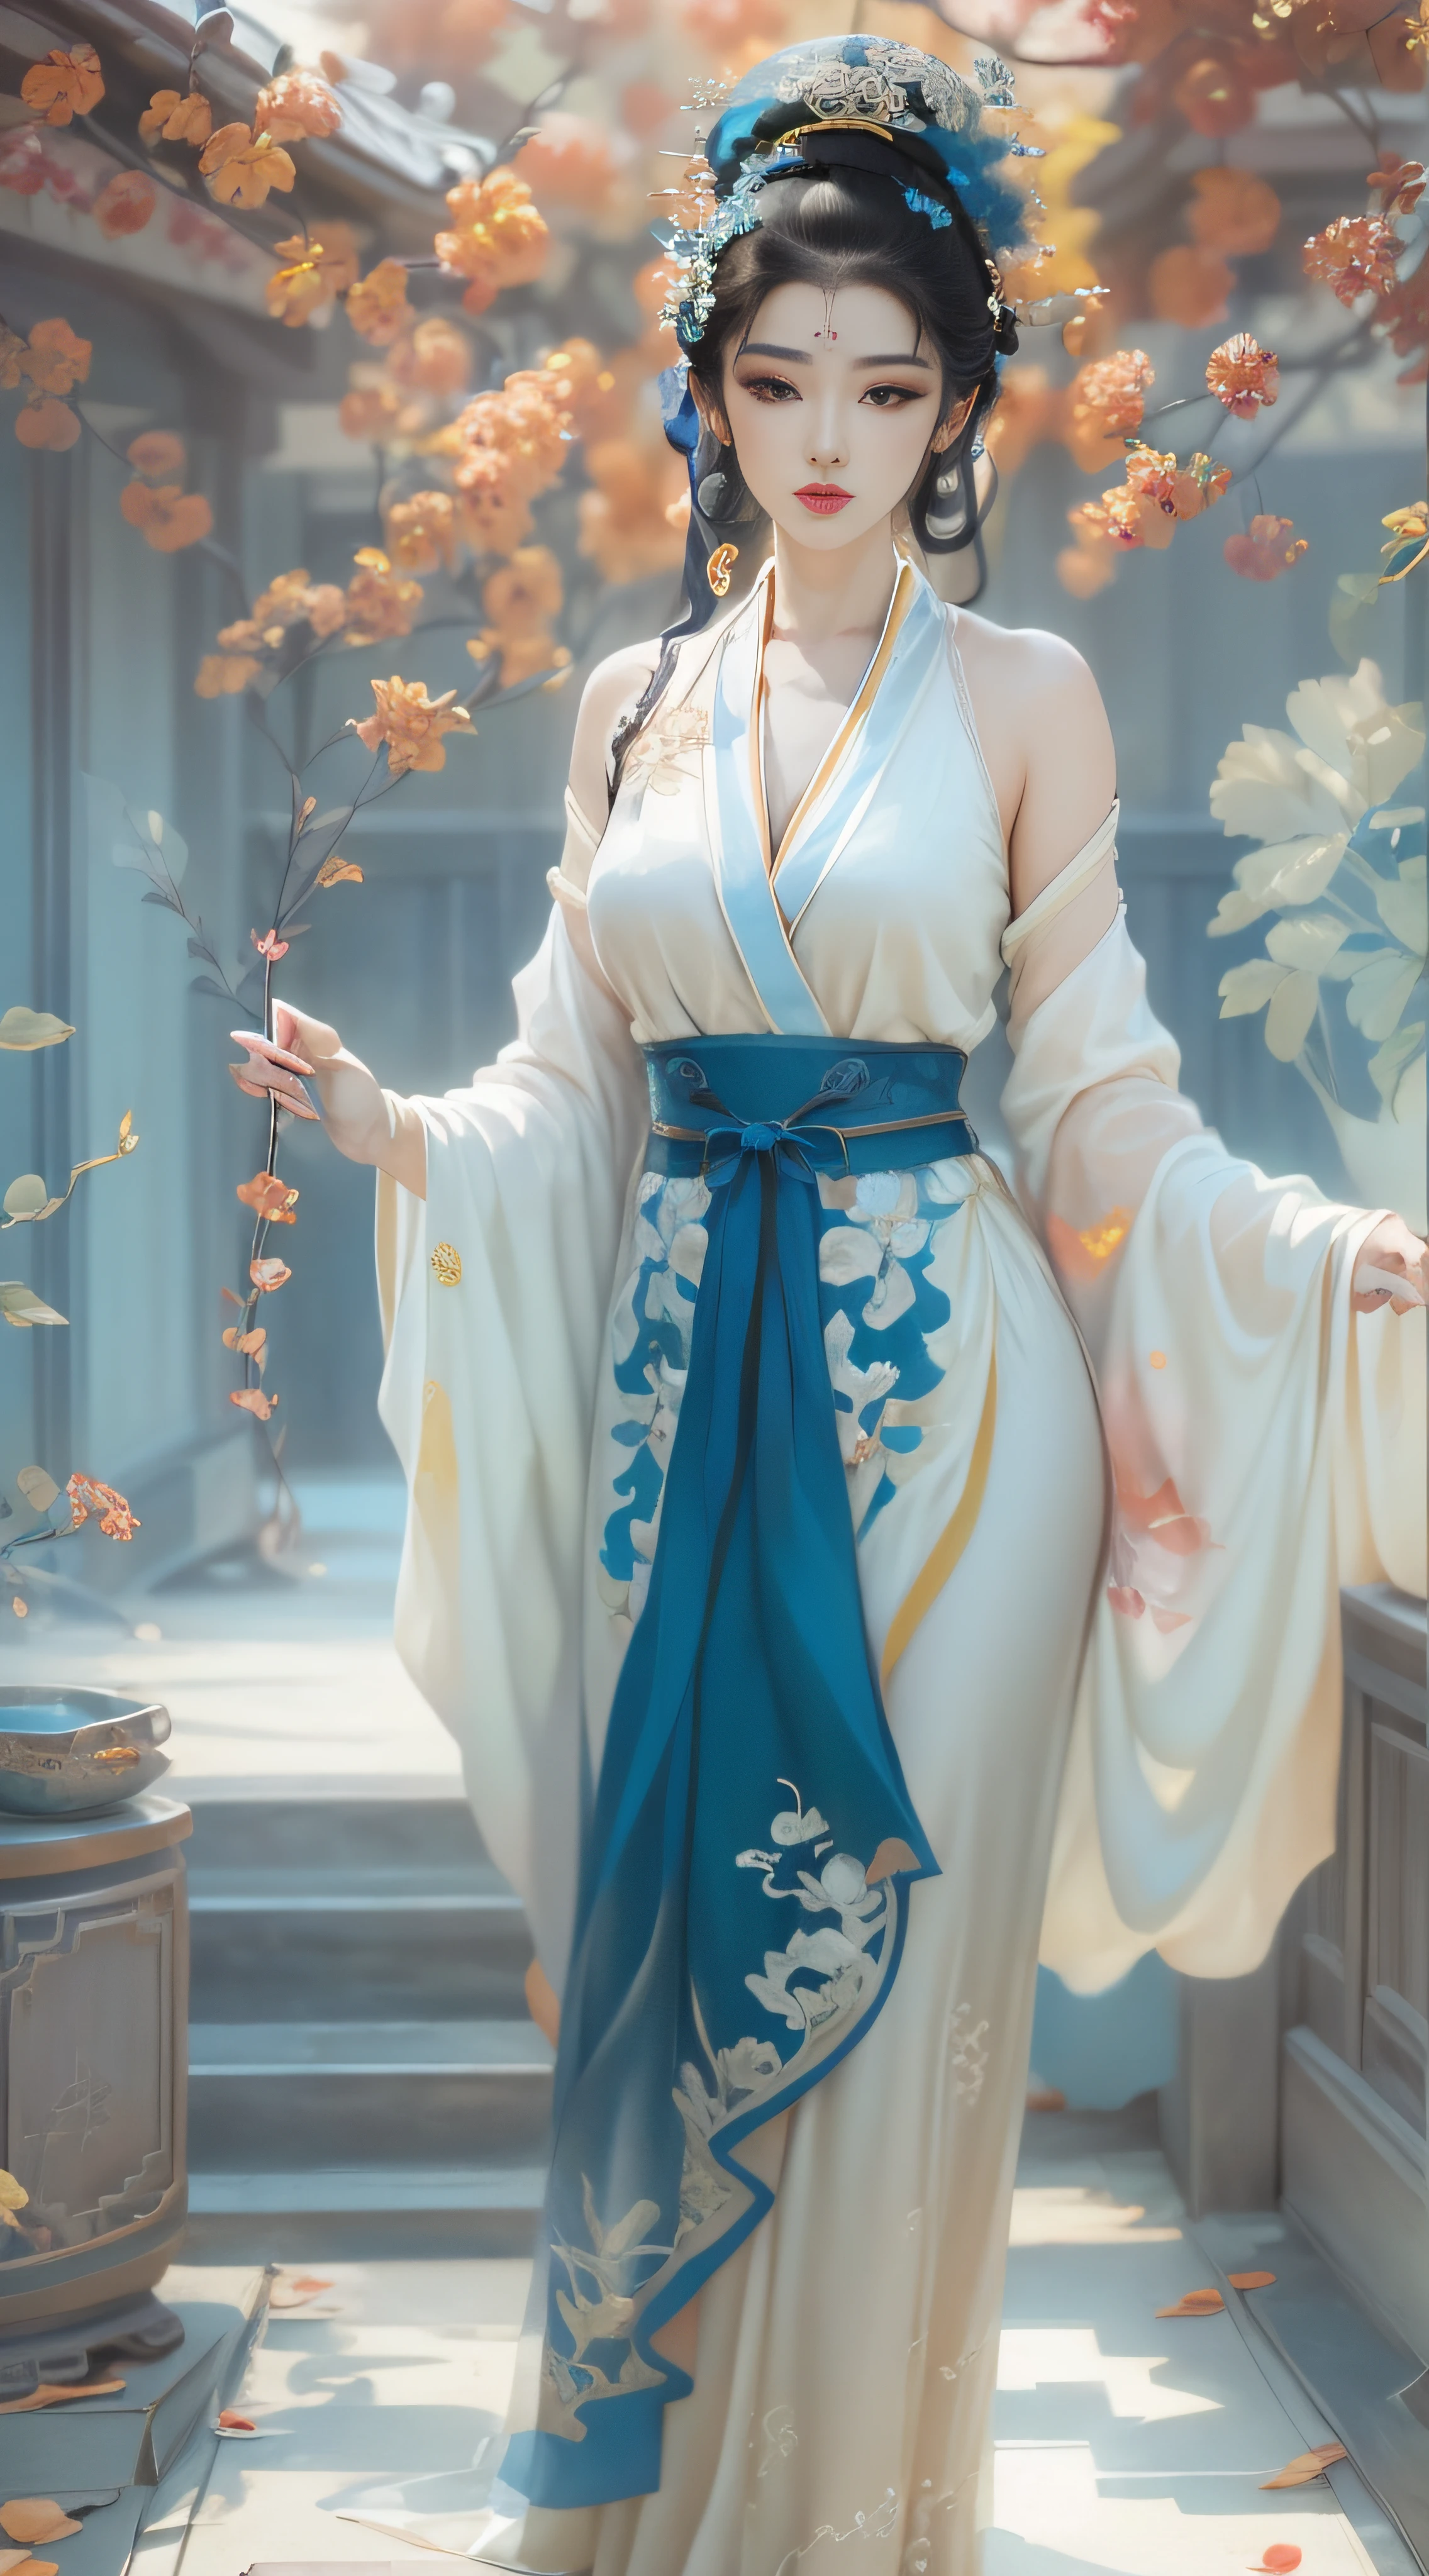 Longing woman posing for photo in blue and white dress, beautiful and seductive anime woman, a beautiful fantasy empress, Inspired by Fenghua Zhong, Beautiful character painting, author：Qiu Ying, sensual painting, By Leng Mei, by Yang J, pinup art, Art germ. anime illustration, inspired by Chen Yifei, author：Chen Lin